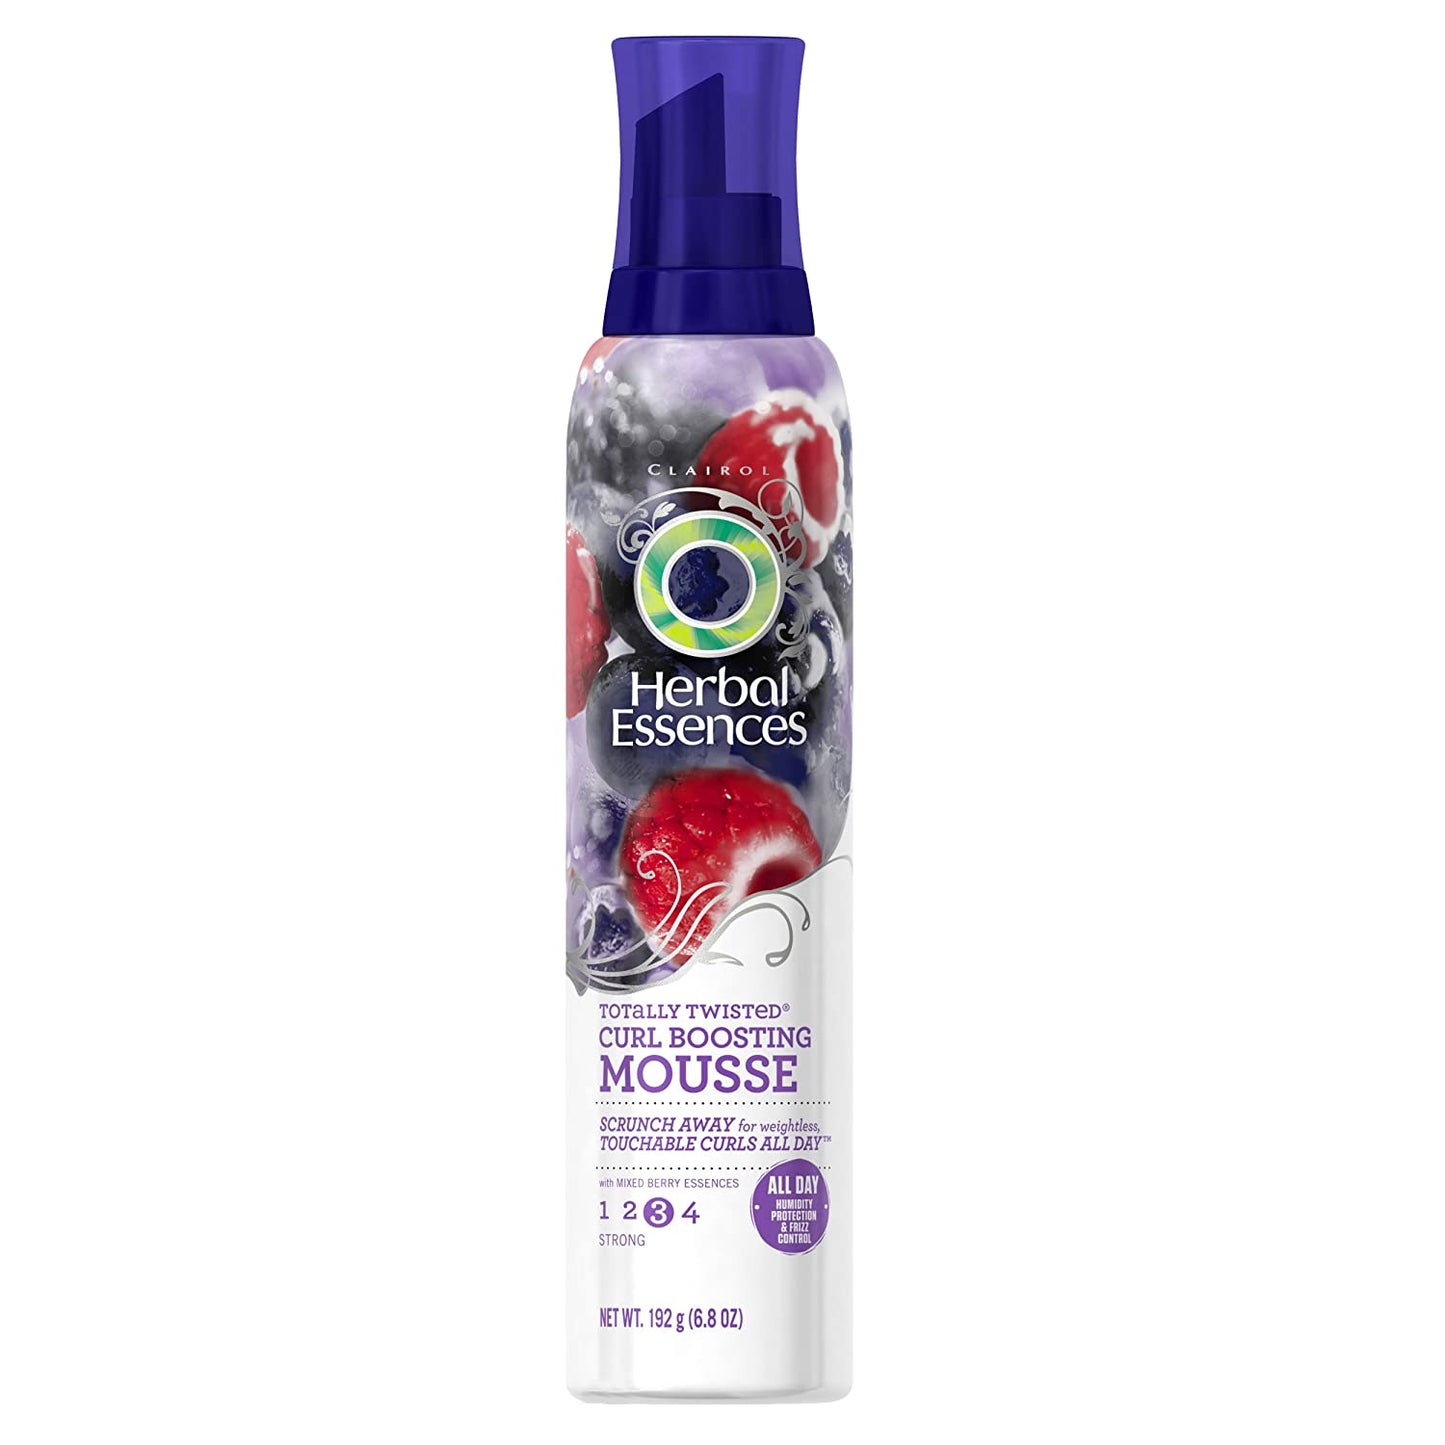 Herbal Essences Totally Twisted Curl-Boosting Mousse with Berry Essences- strong hold